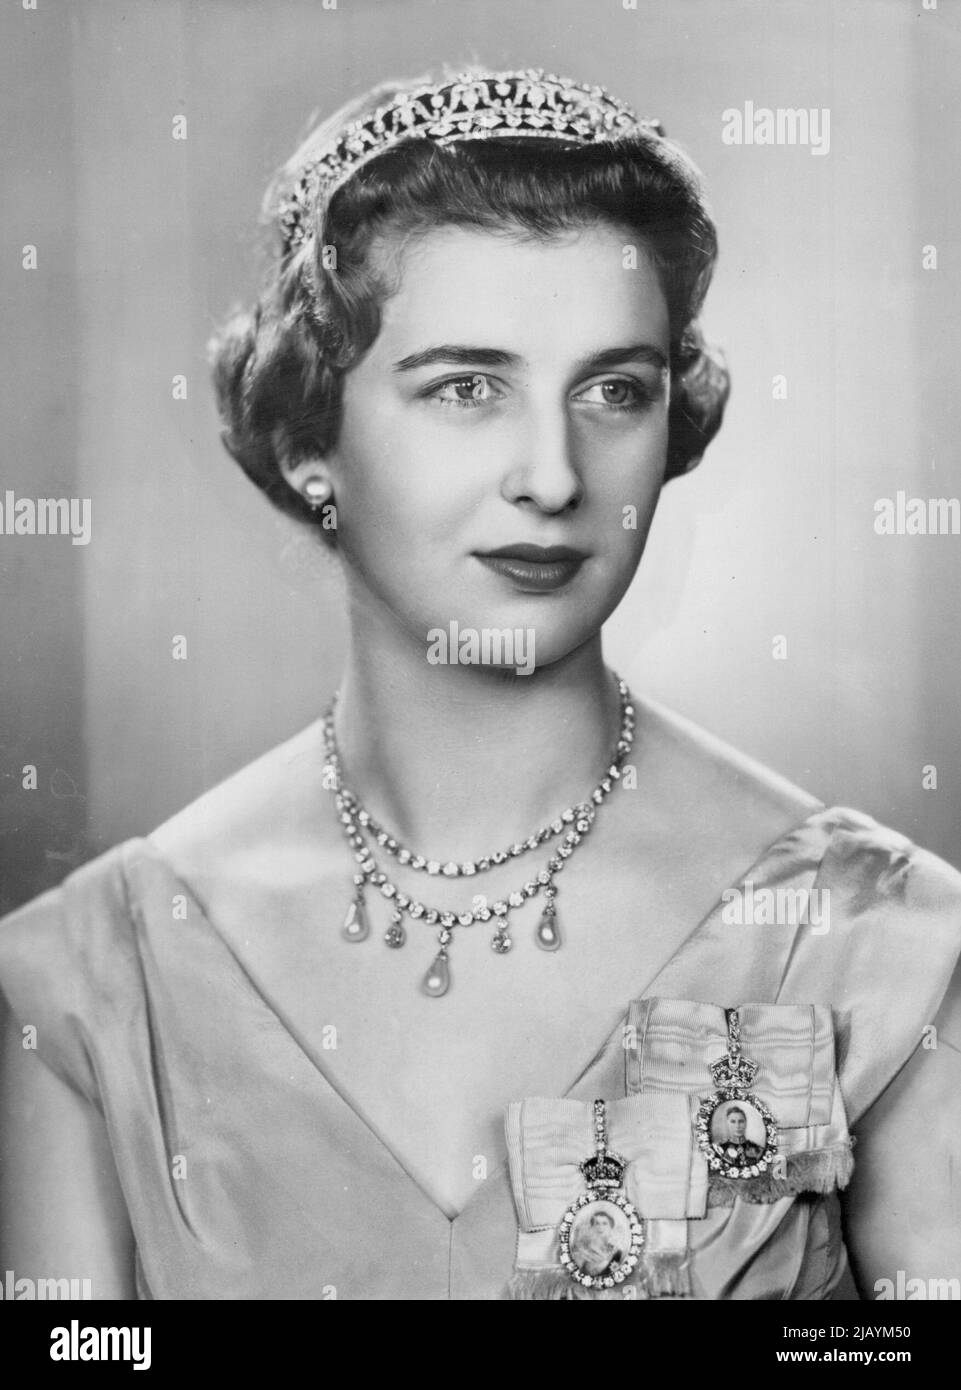 H.R.H. Princess Alexandra, Aged 19 -- On Xmas Day, December 25, 1955, H.R.H. Princess Alexandra Helen Elizabeth Olga Christabel, the daughter of the Duchess of Kent, will celebrate her 19th birthday. December 25, 1955. (Photo by Dorothy Wilding, Camera Press) Stock Photo